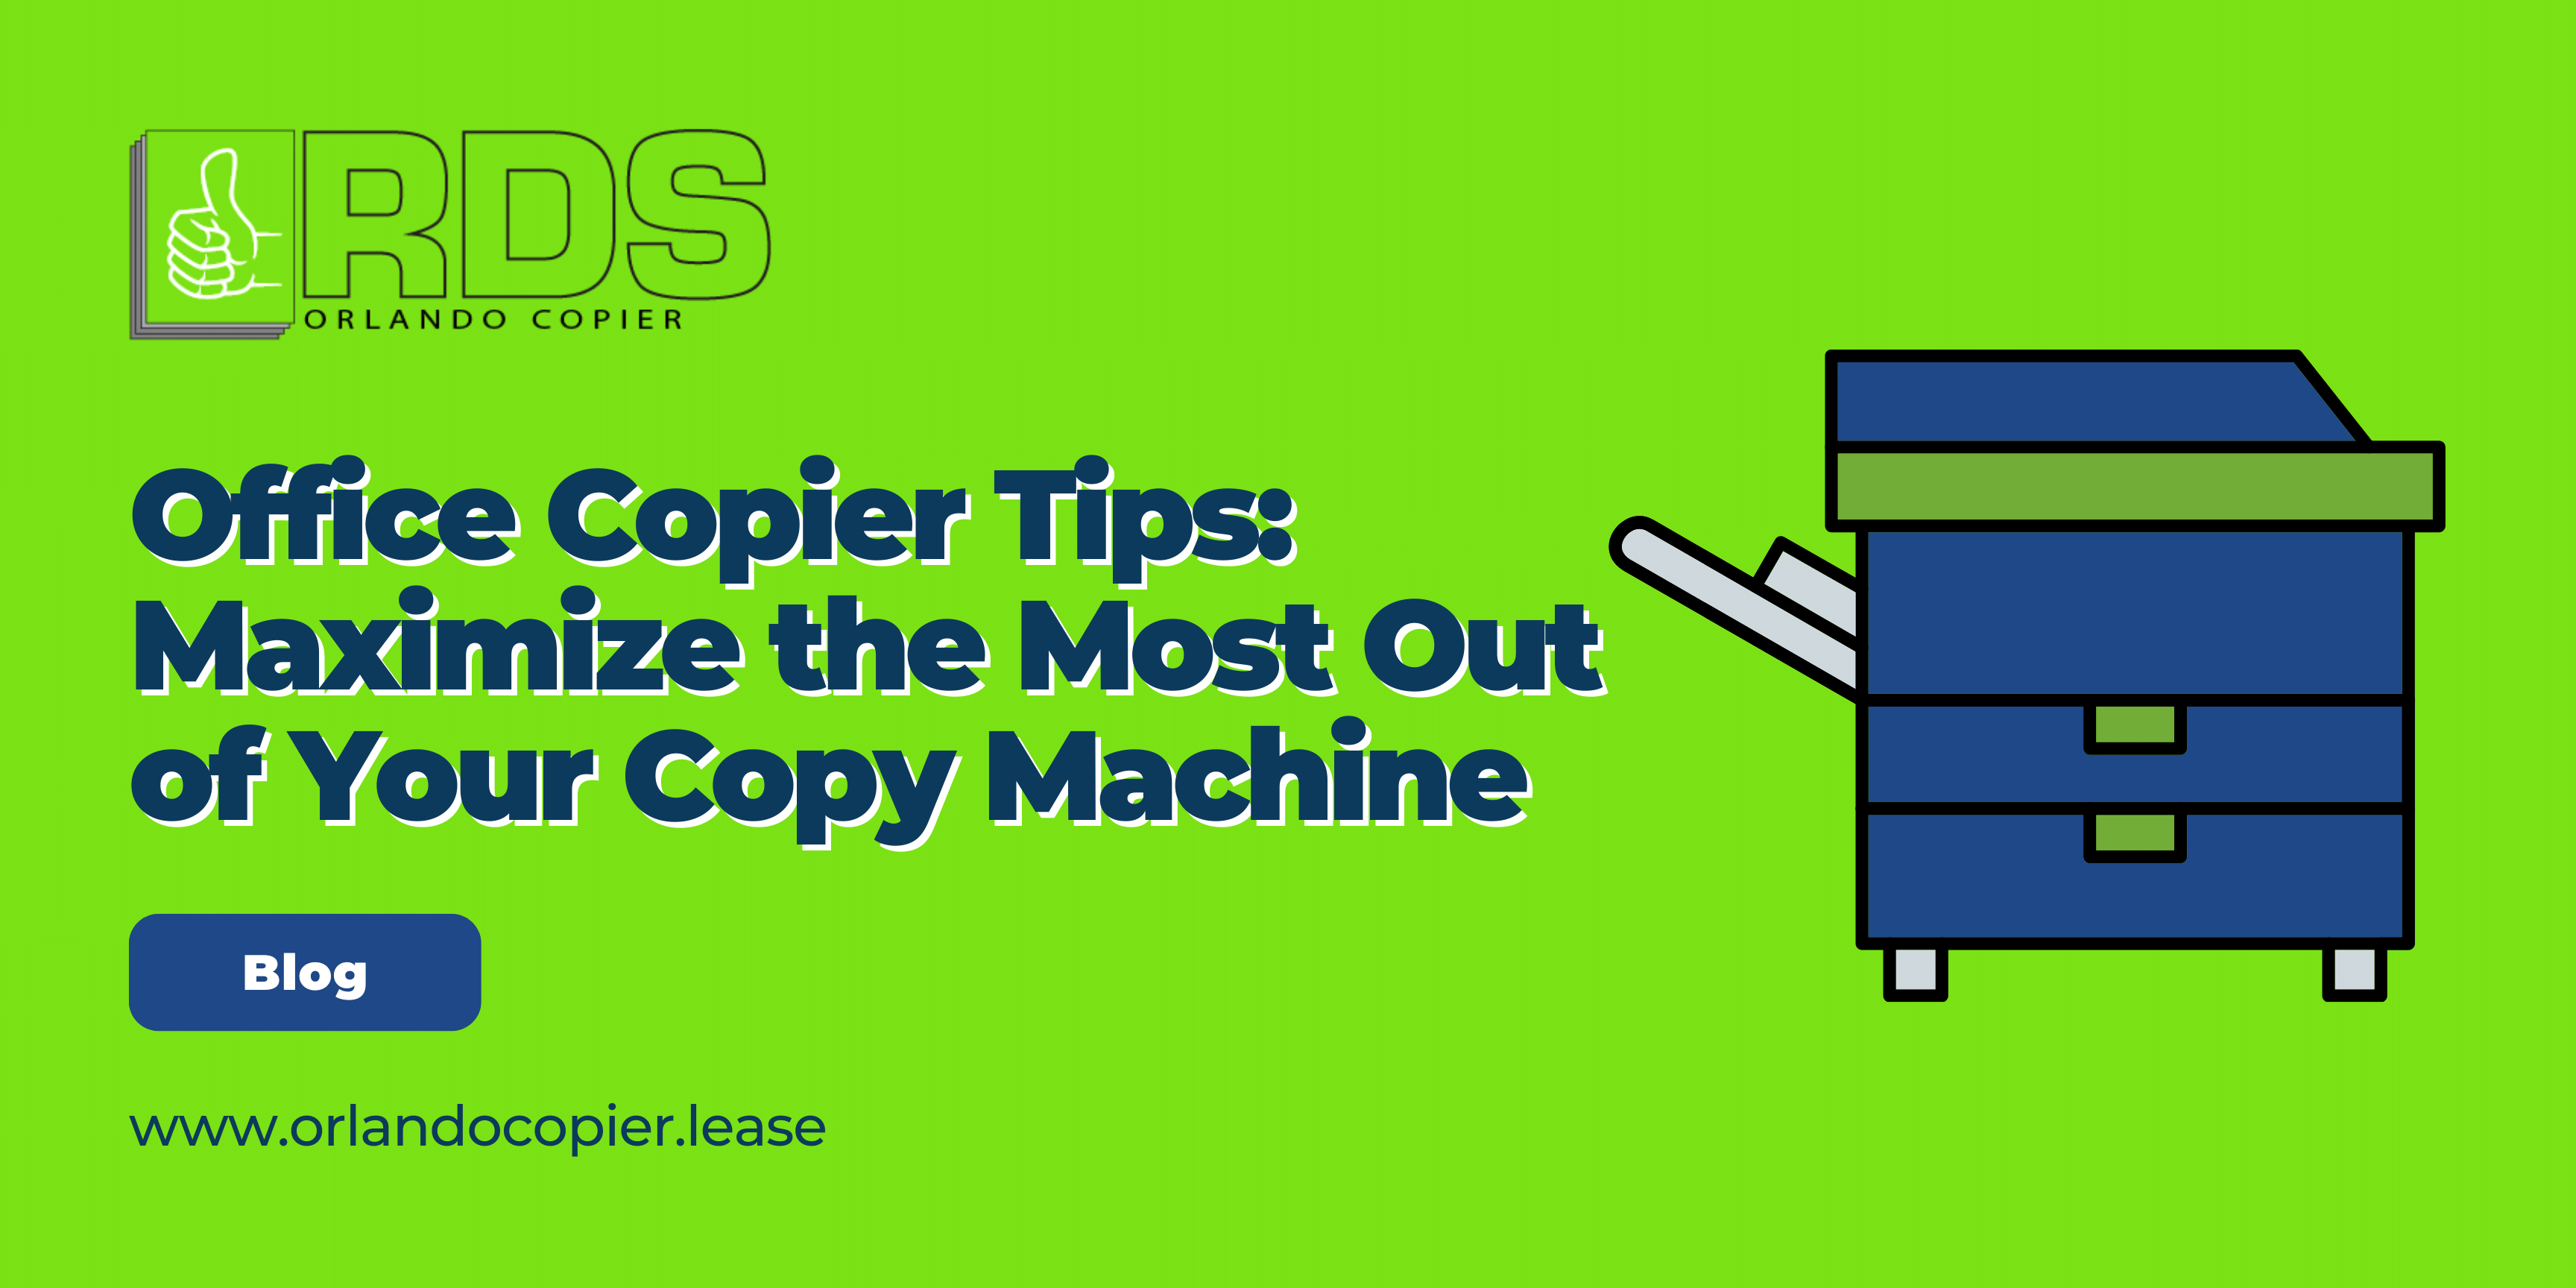 Office Copier Tips: Maximize the Most Out of Your Copy Machine￼